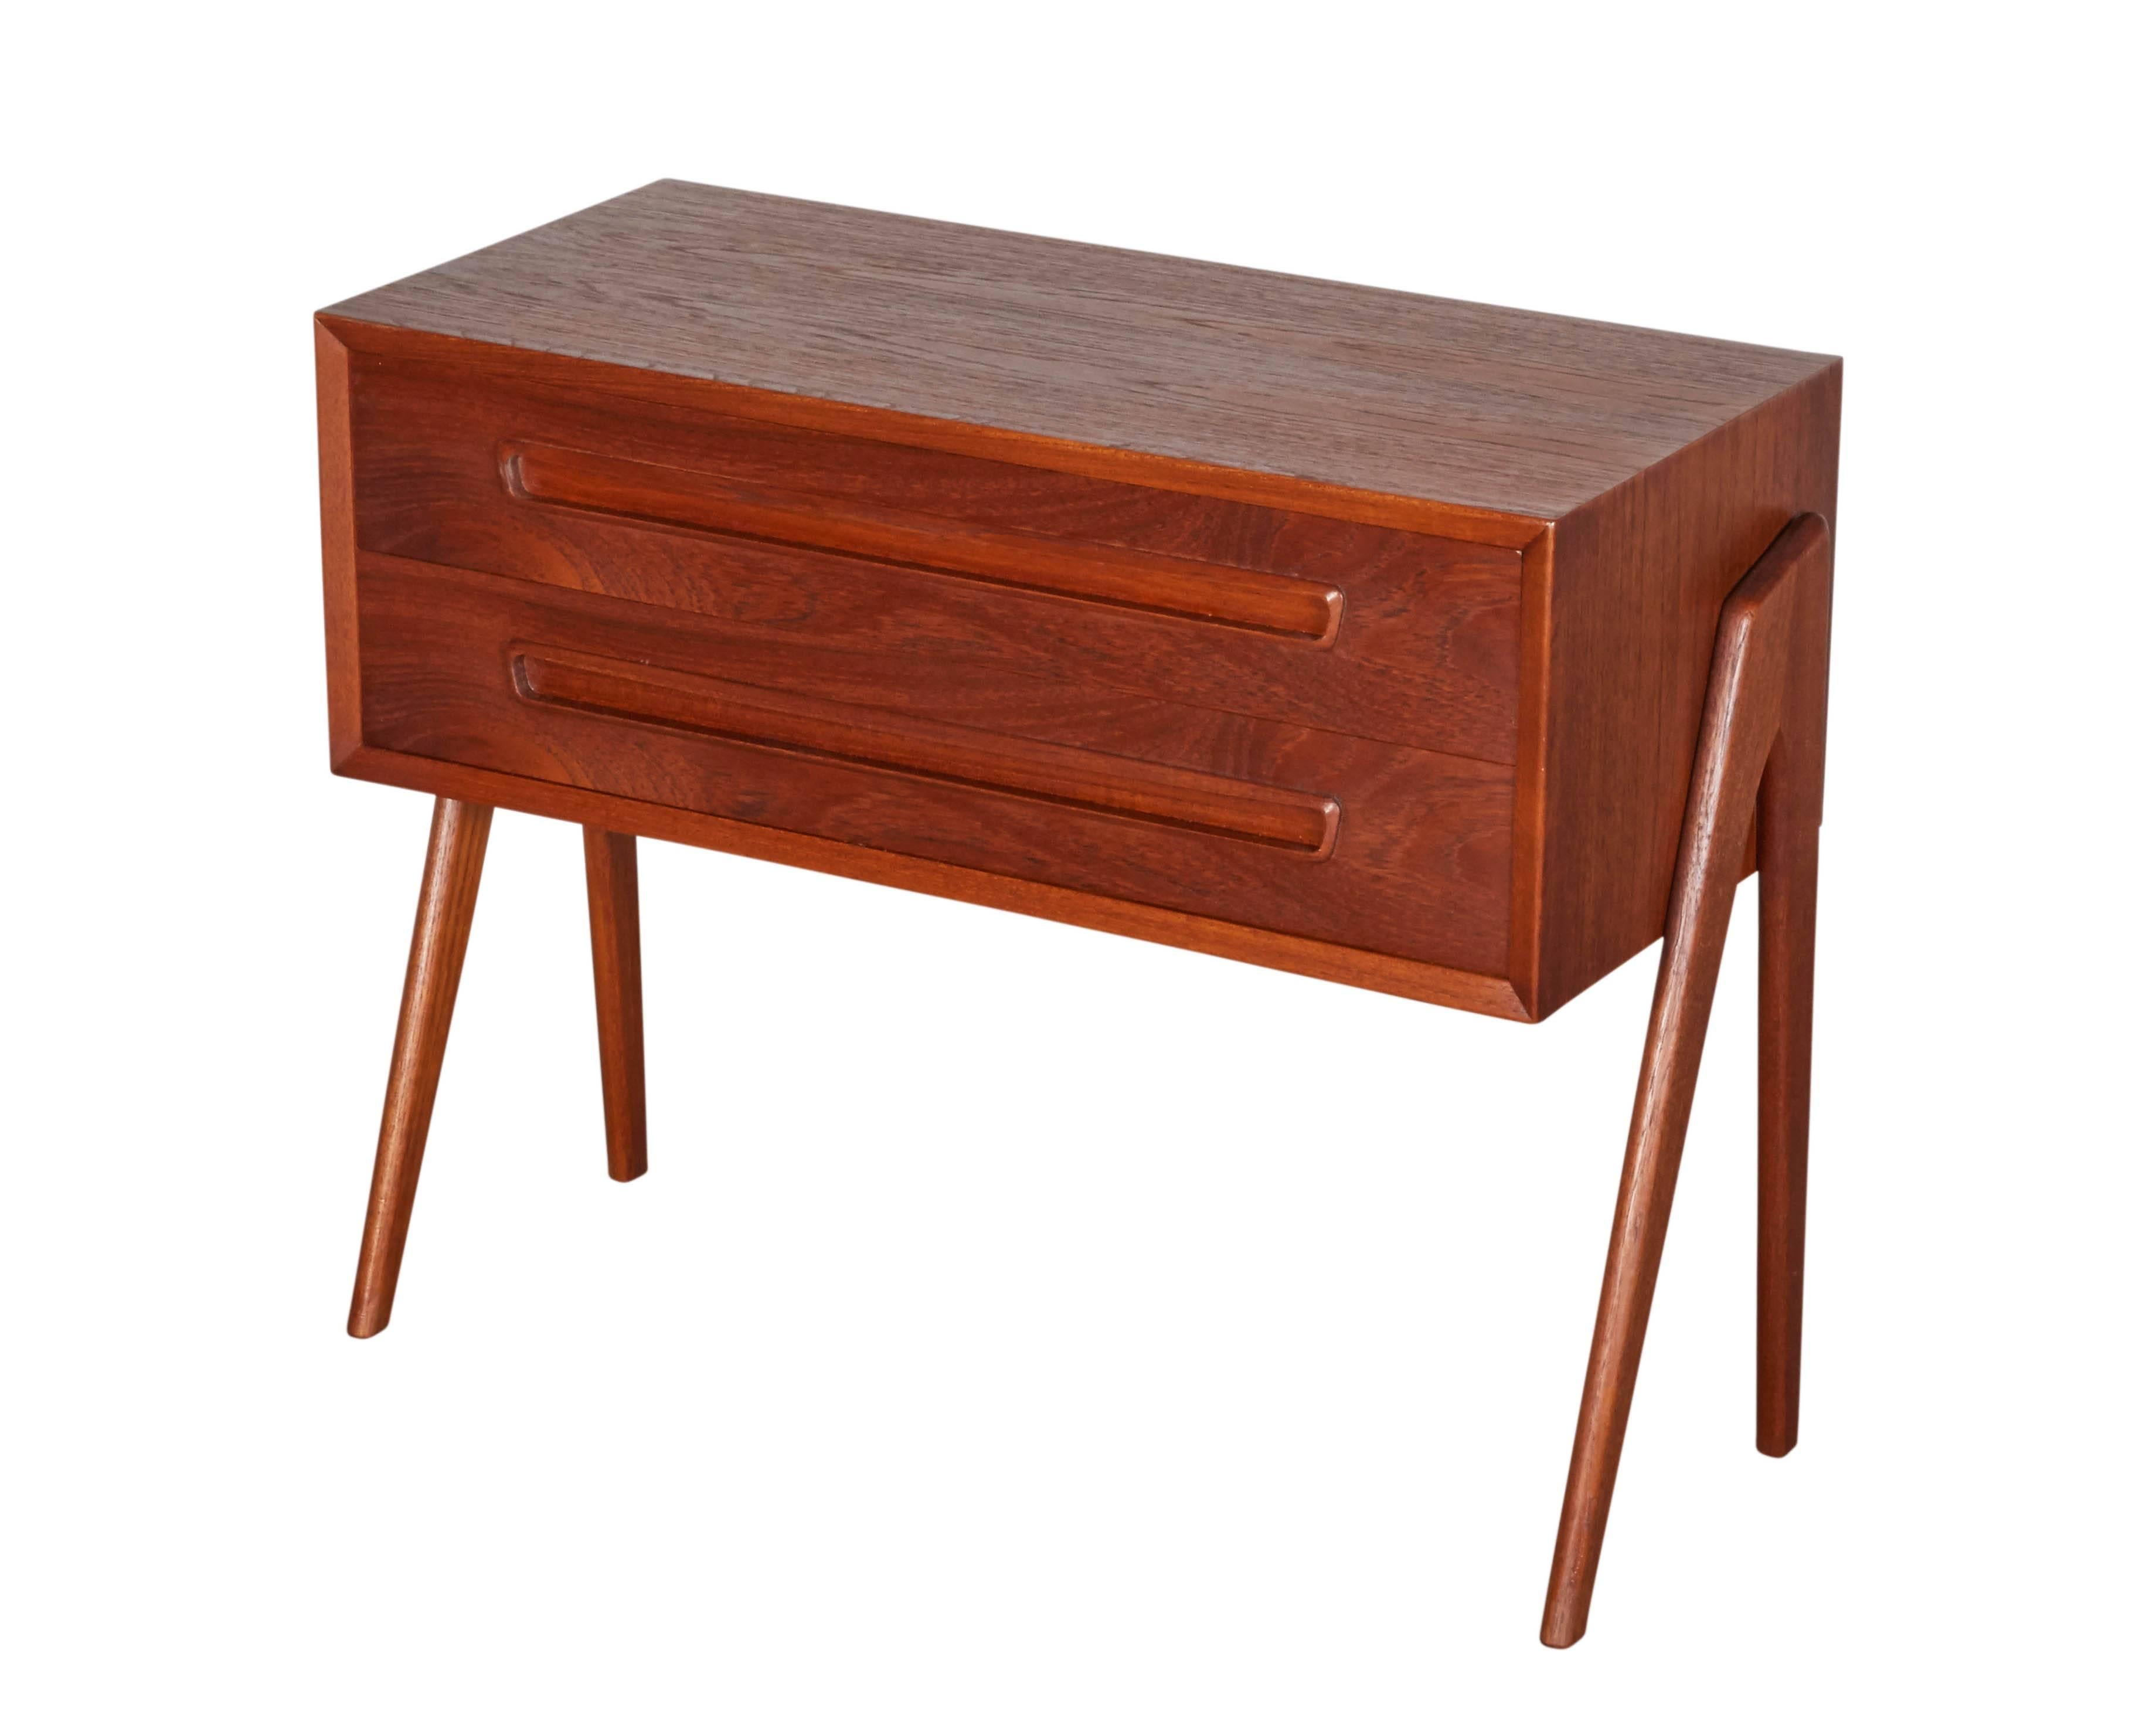 Vintage 1960s Danish Nightstands

This pair of mid century bedside tables are in excellent condition. They can also be used as living room end tables. Ready for pick up, delivery, or shipping anywhere in the world.